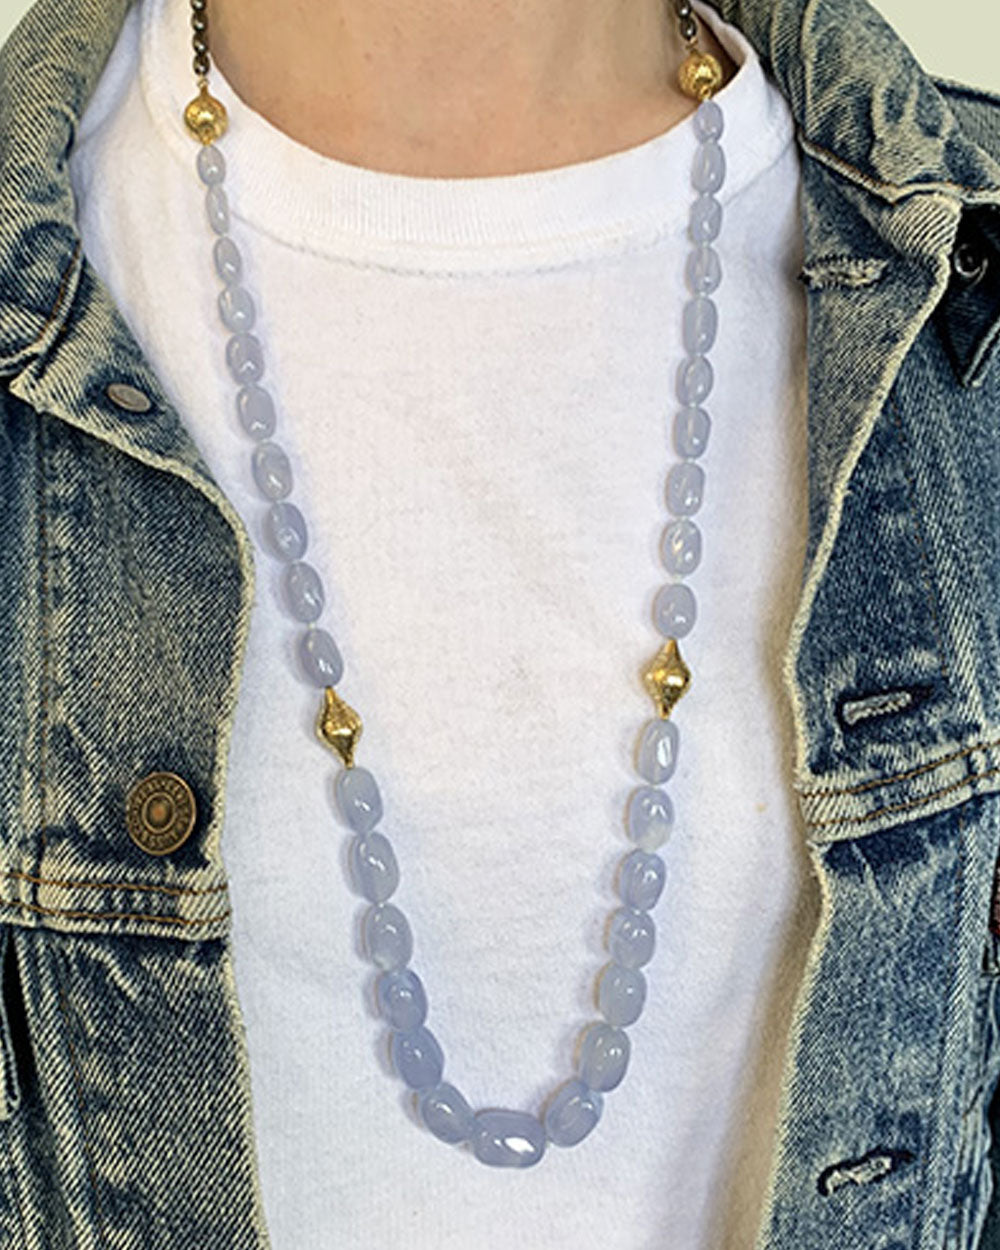 Tumbled Chalcedony and Crownwork Finials Necklace